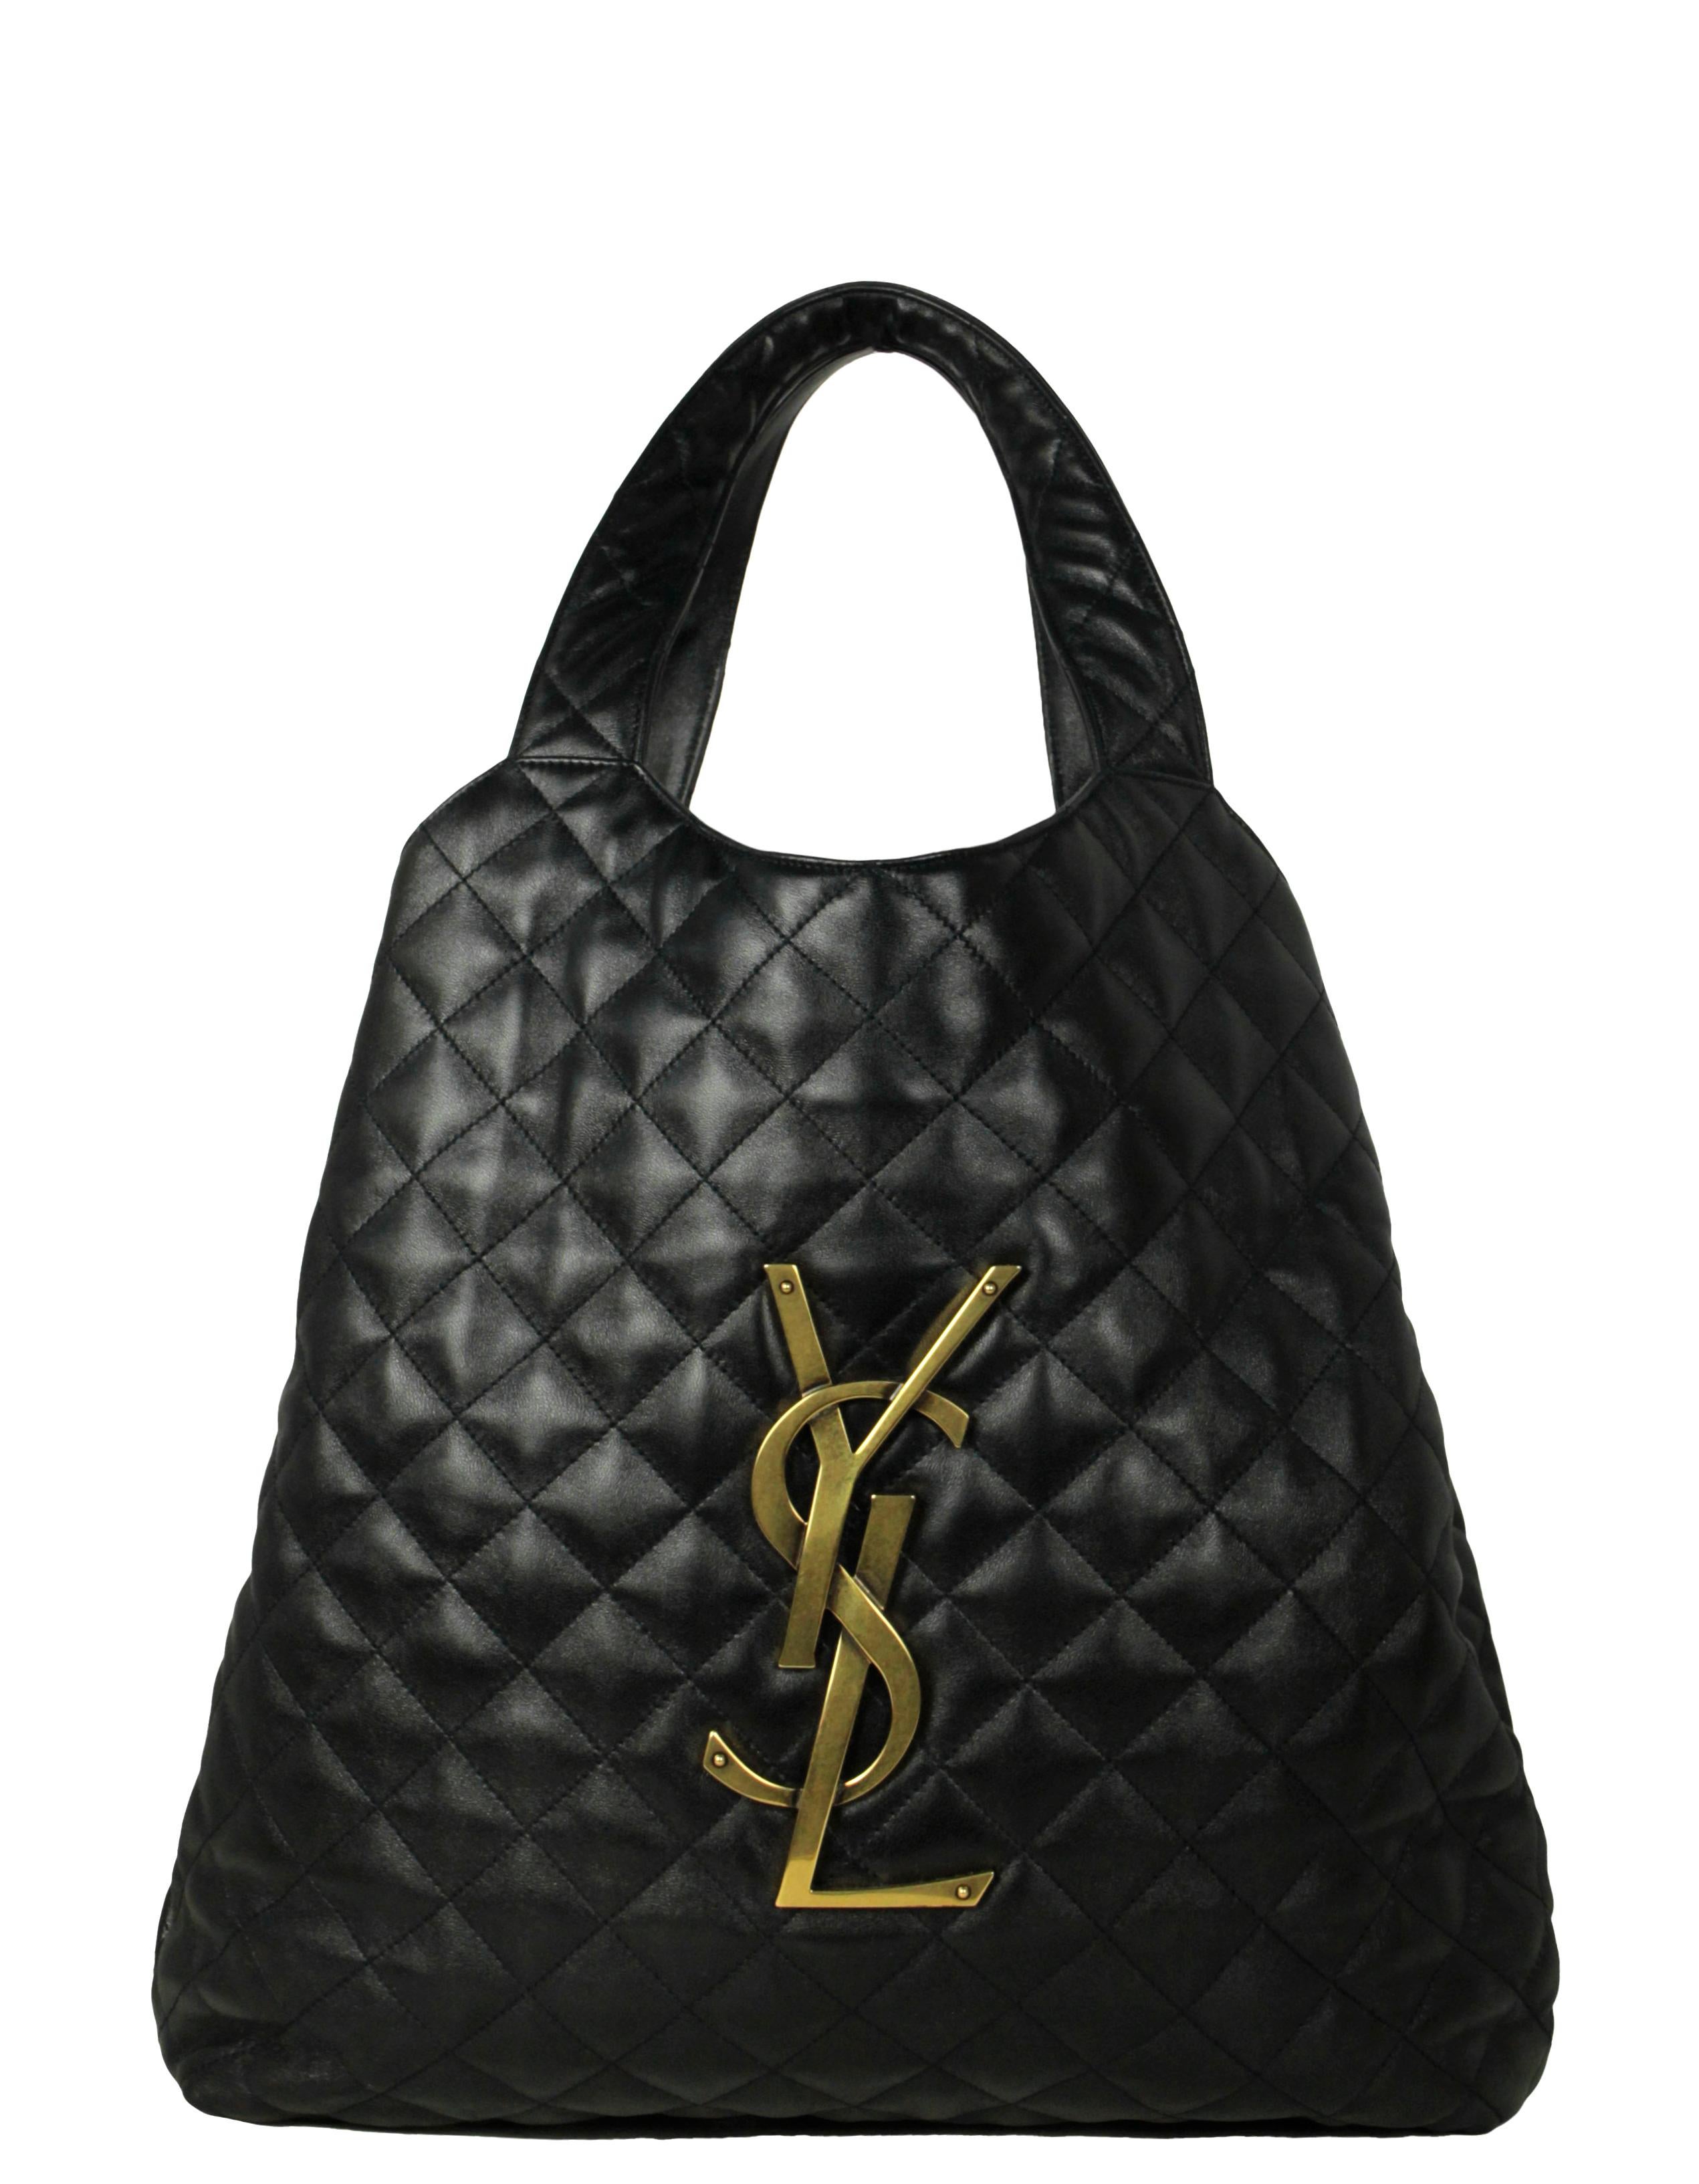 Saint Laurent NEW Black Quilted Leather Icare Maxi Shopping Tote Bag 1